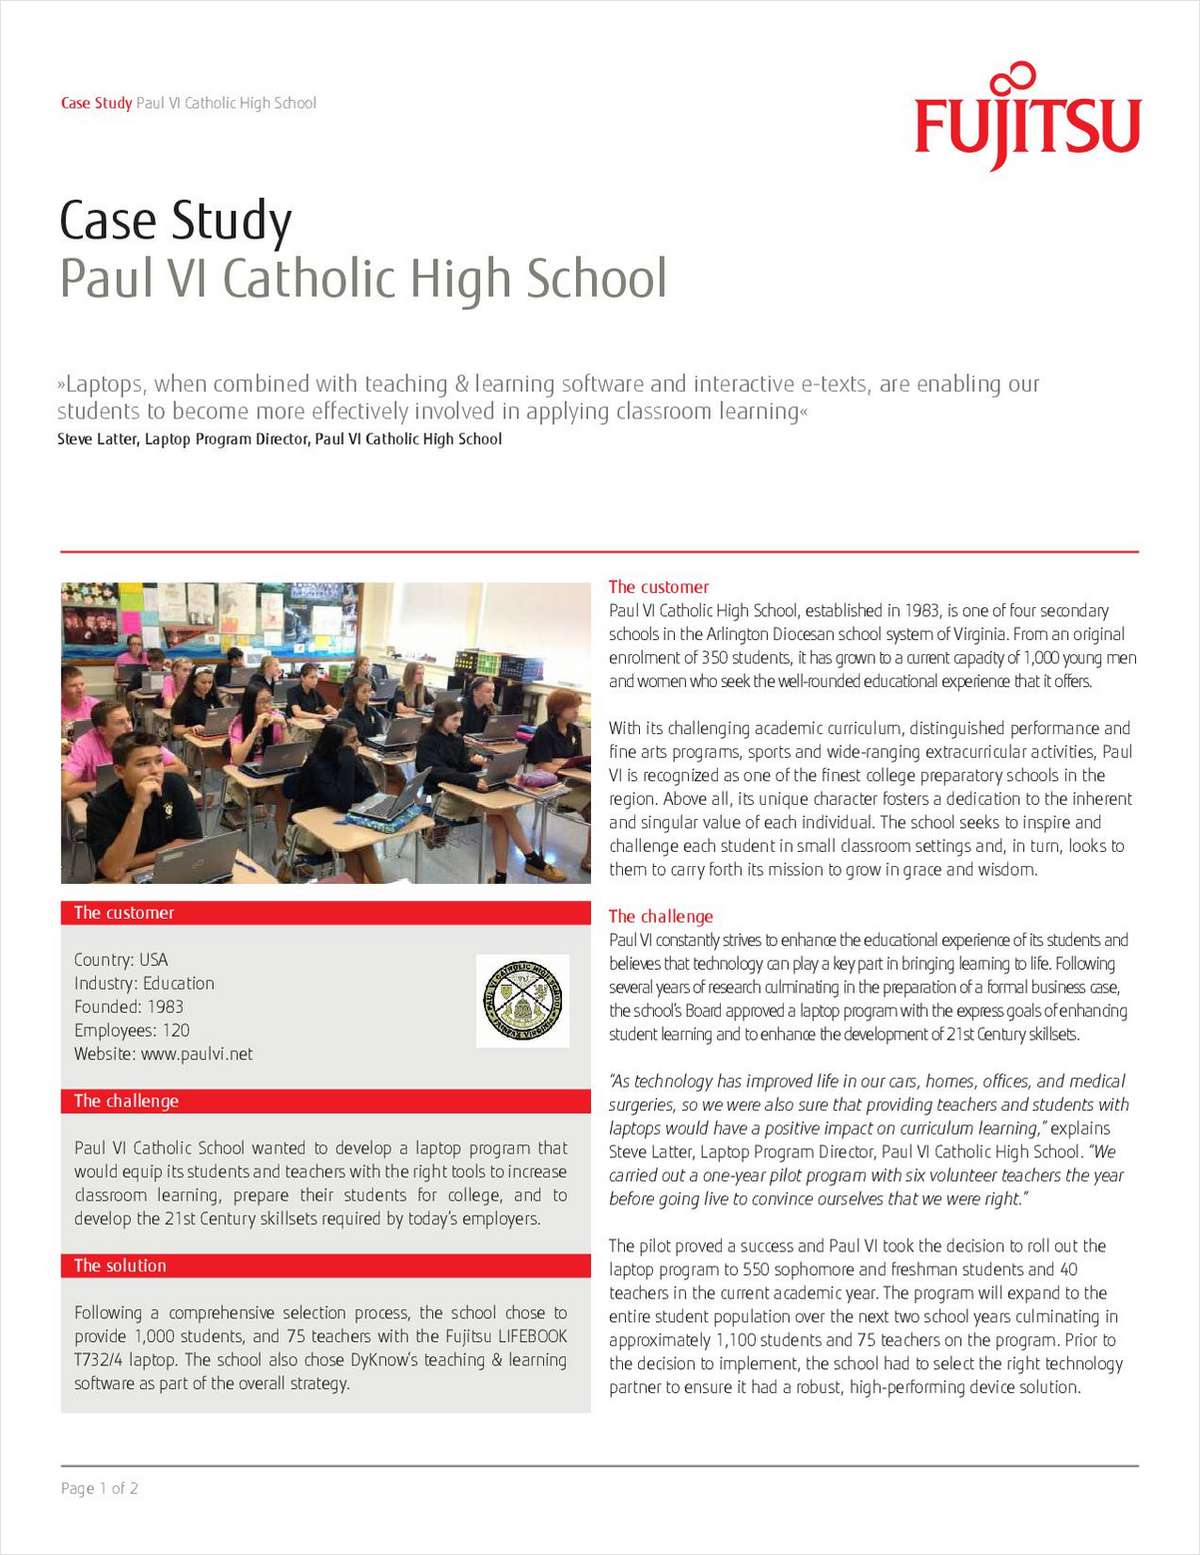 Explore How Paul VI Catholic High School Benefited From Fujitsu's Devices and Software